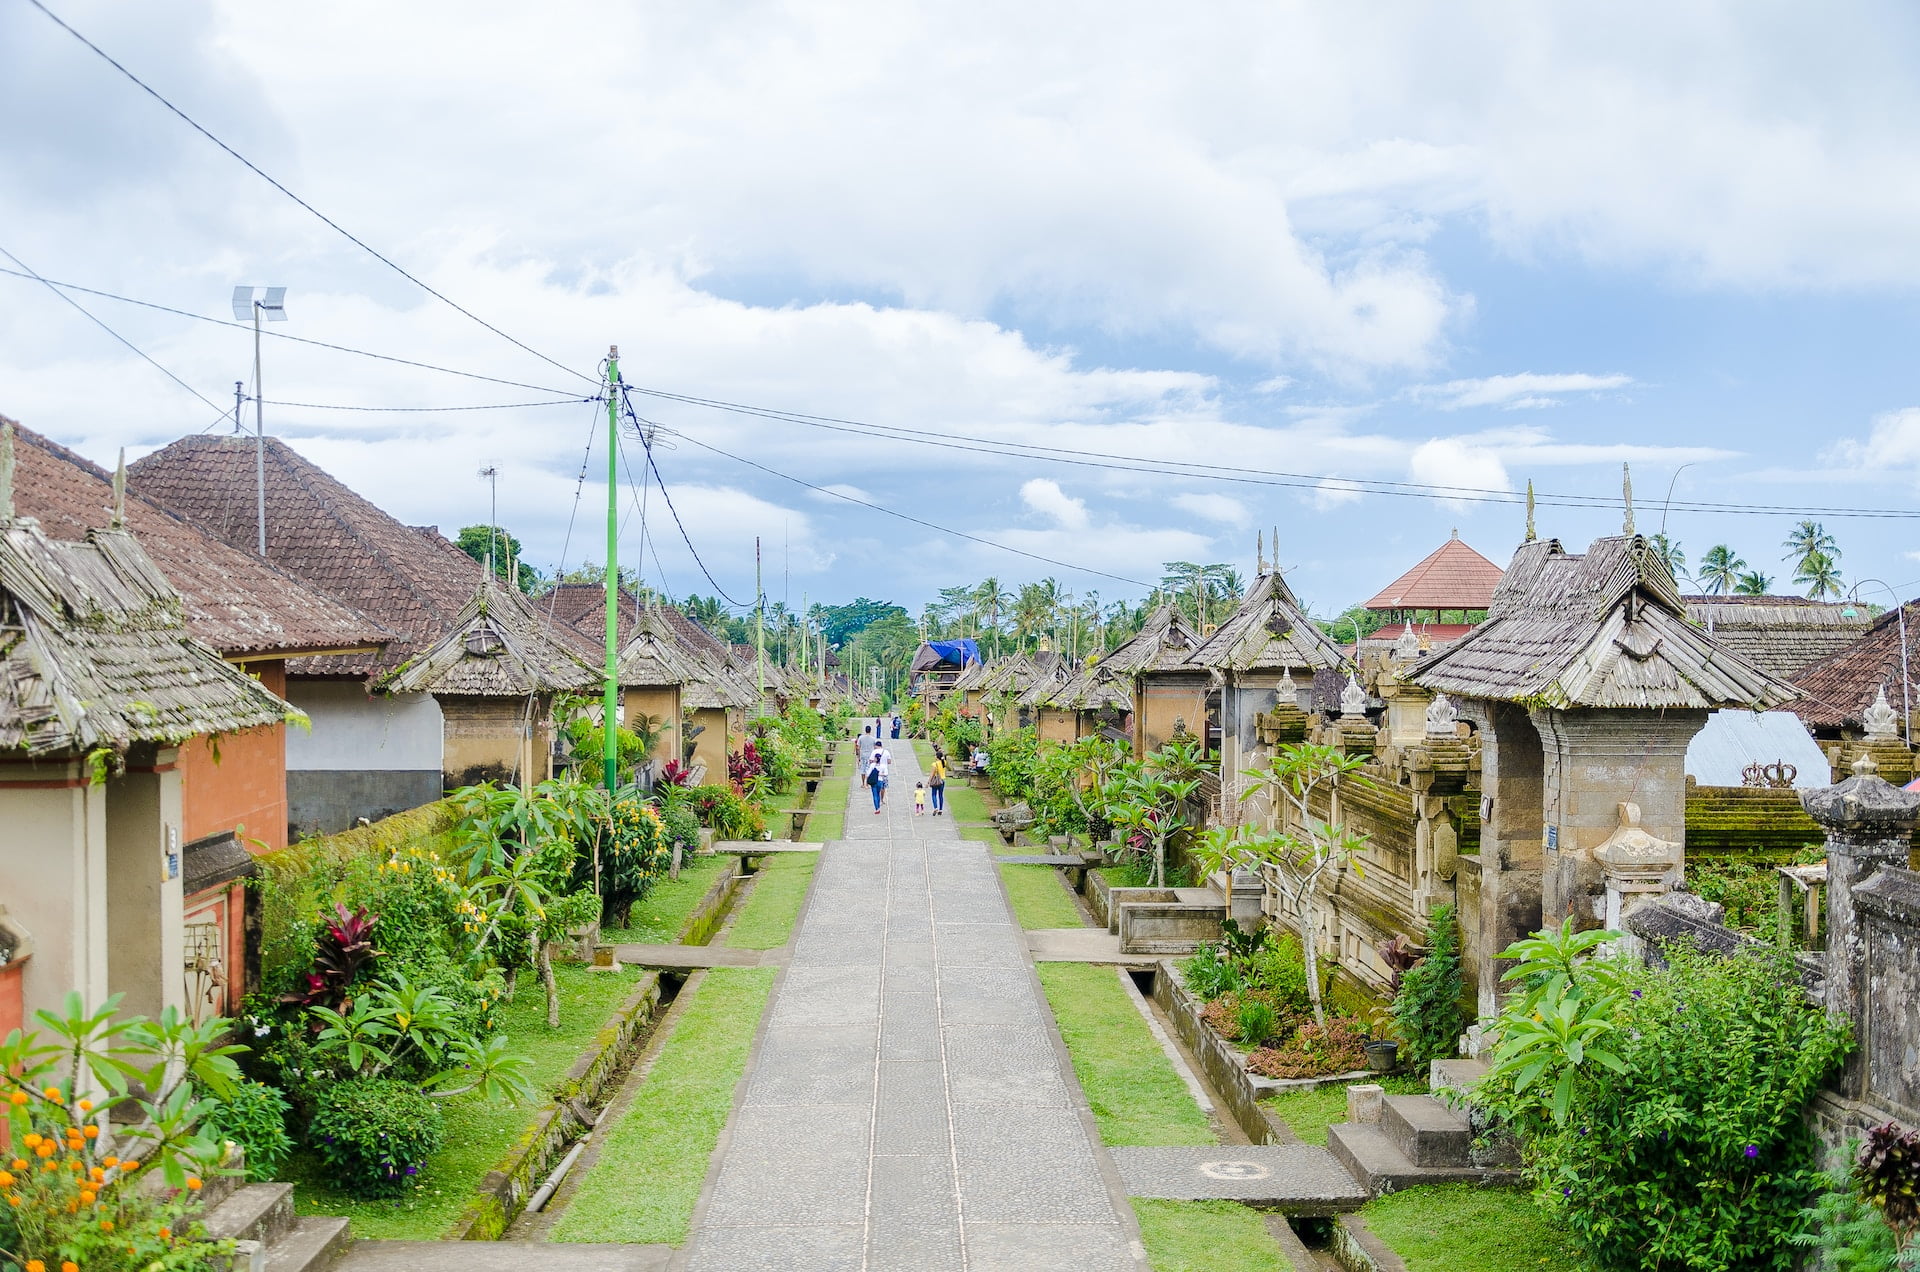 Padangtegal Village, Bali: Citizen-Led Low Waste Model of how other Villages can do the Same